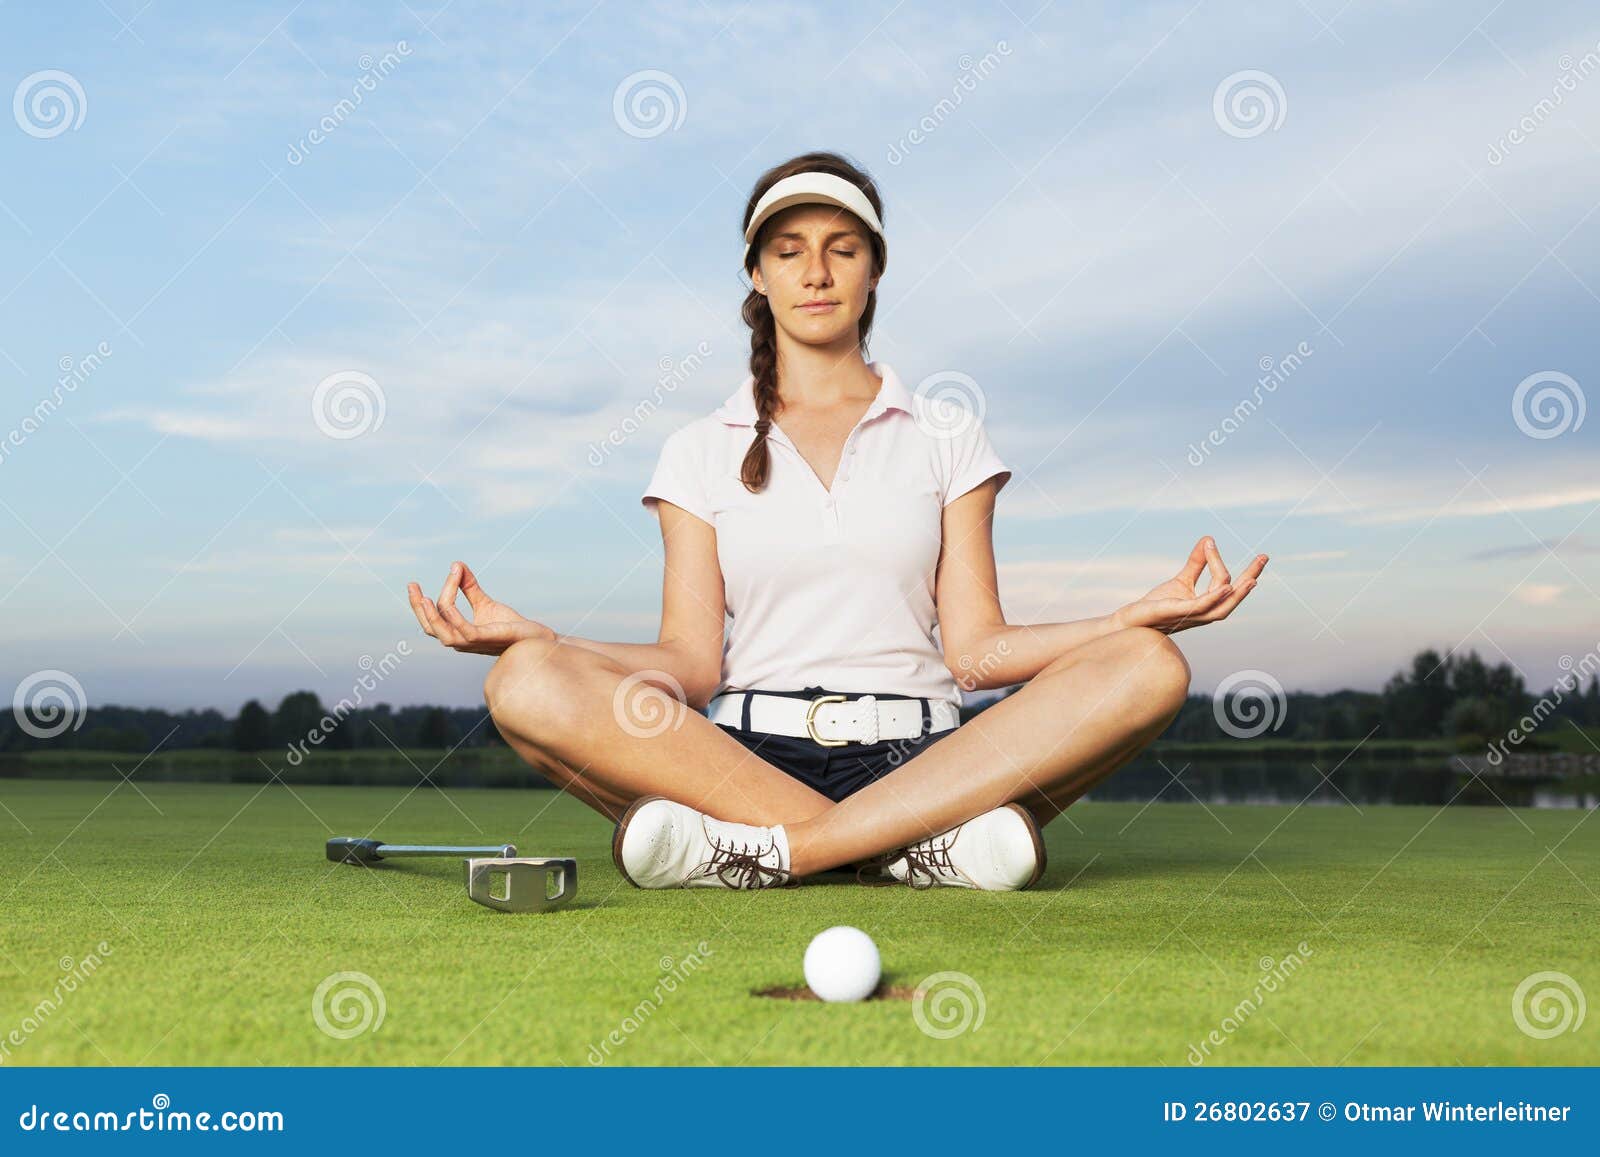 Golfer Sitting In Yoga Posture On Golf Course Royalty Free Stock throughout Golfing Yoga